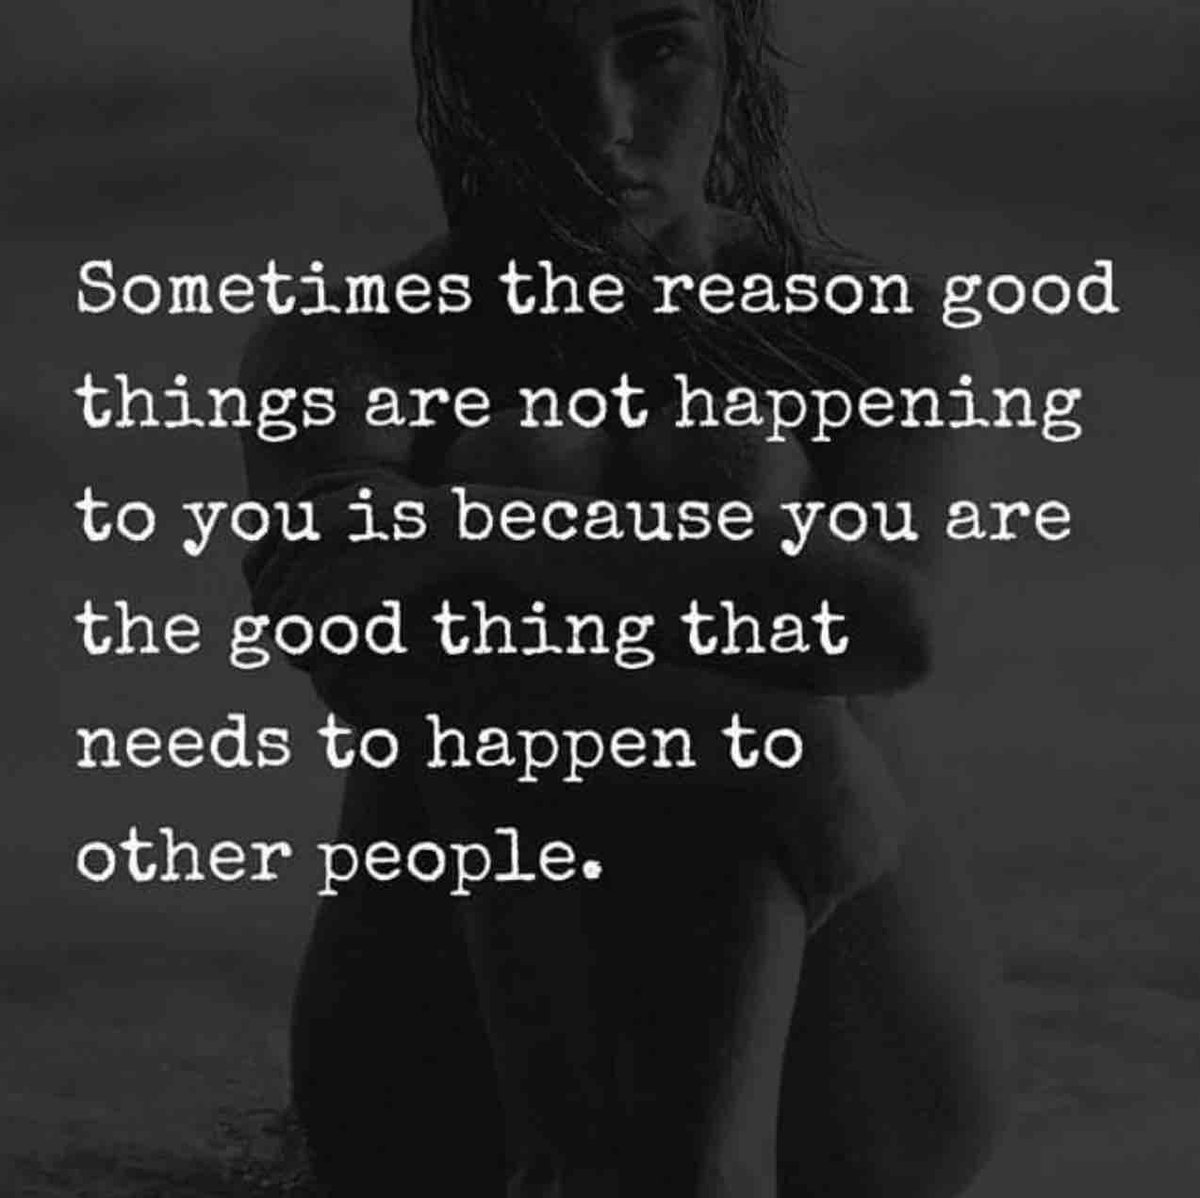 You are the good thing that needs to happen to other people. ✌️